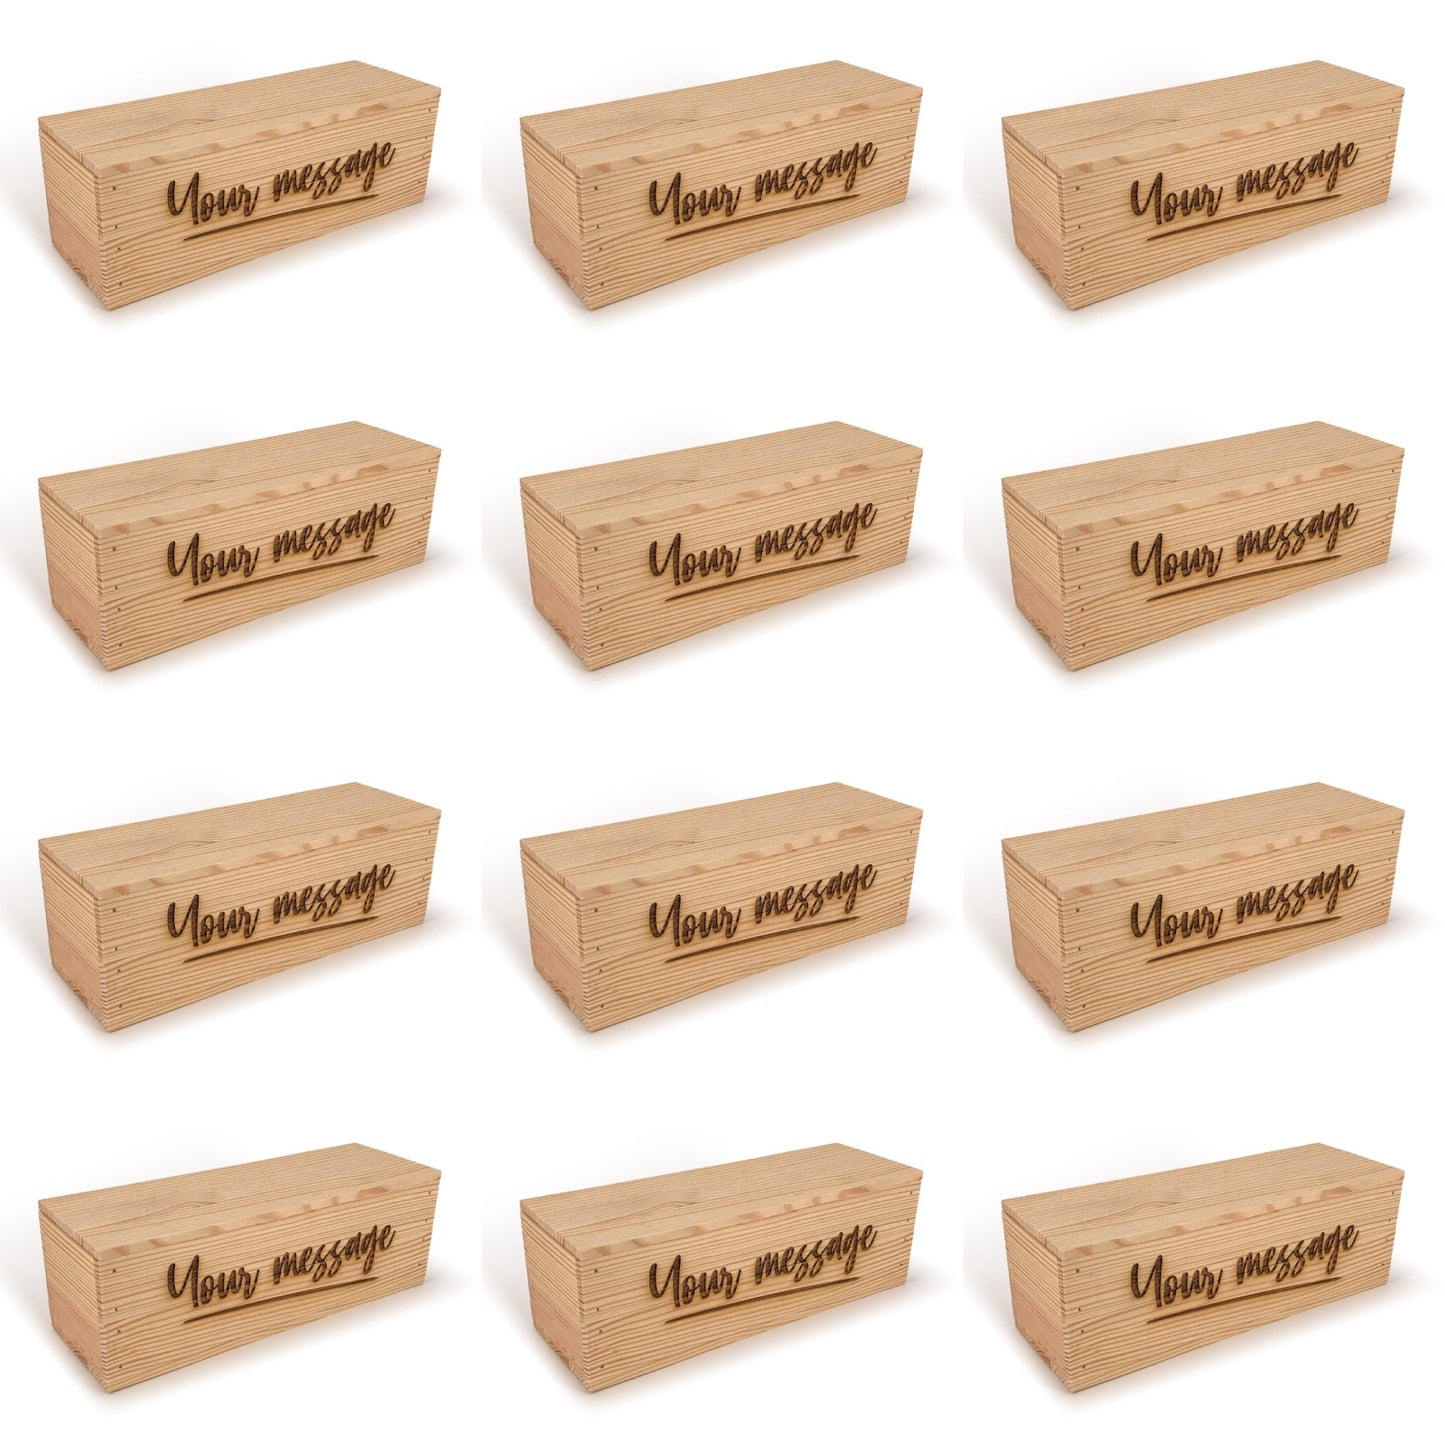 12 Single Bottle Wine Crate Box with Lid and Custom Message 14x4.5x4.5, 6-WB-14-4.5-4.5-ST-NW-LL,  12-WB-14-4.5-4.5-ST-NW-LL,  24-WB-14-4.5-4.5-ST-NW-LL,  48-WB-14-4.5-4.5-ST-NW-LL,  96-WB-14-4.5-4.5-ST-NW-LL